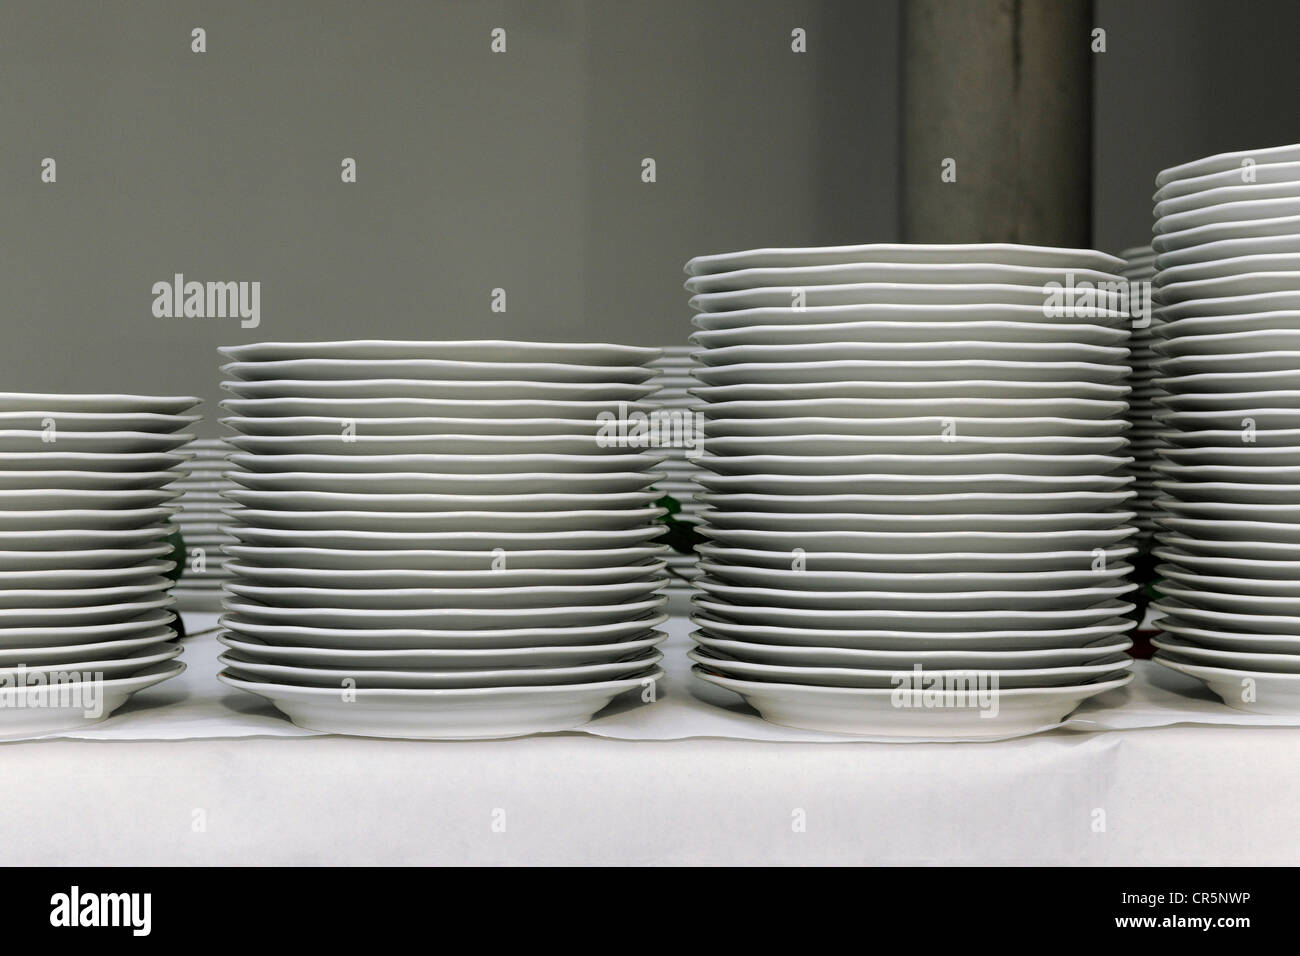 Stacks of white dinner plates on a table, preparations for a corporate event, Thuringia, Germany, Europe Stock Photo